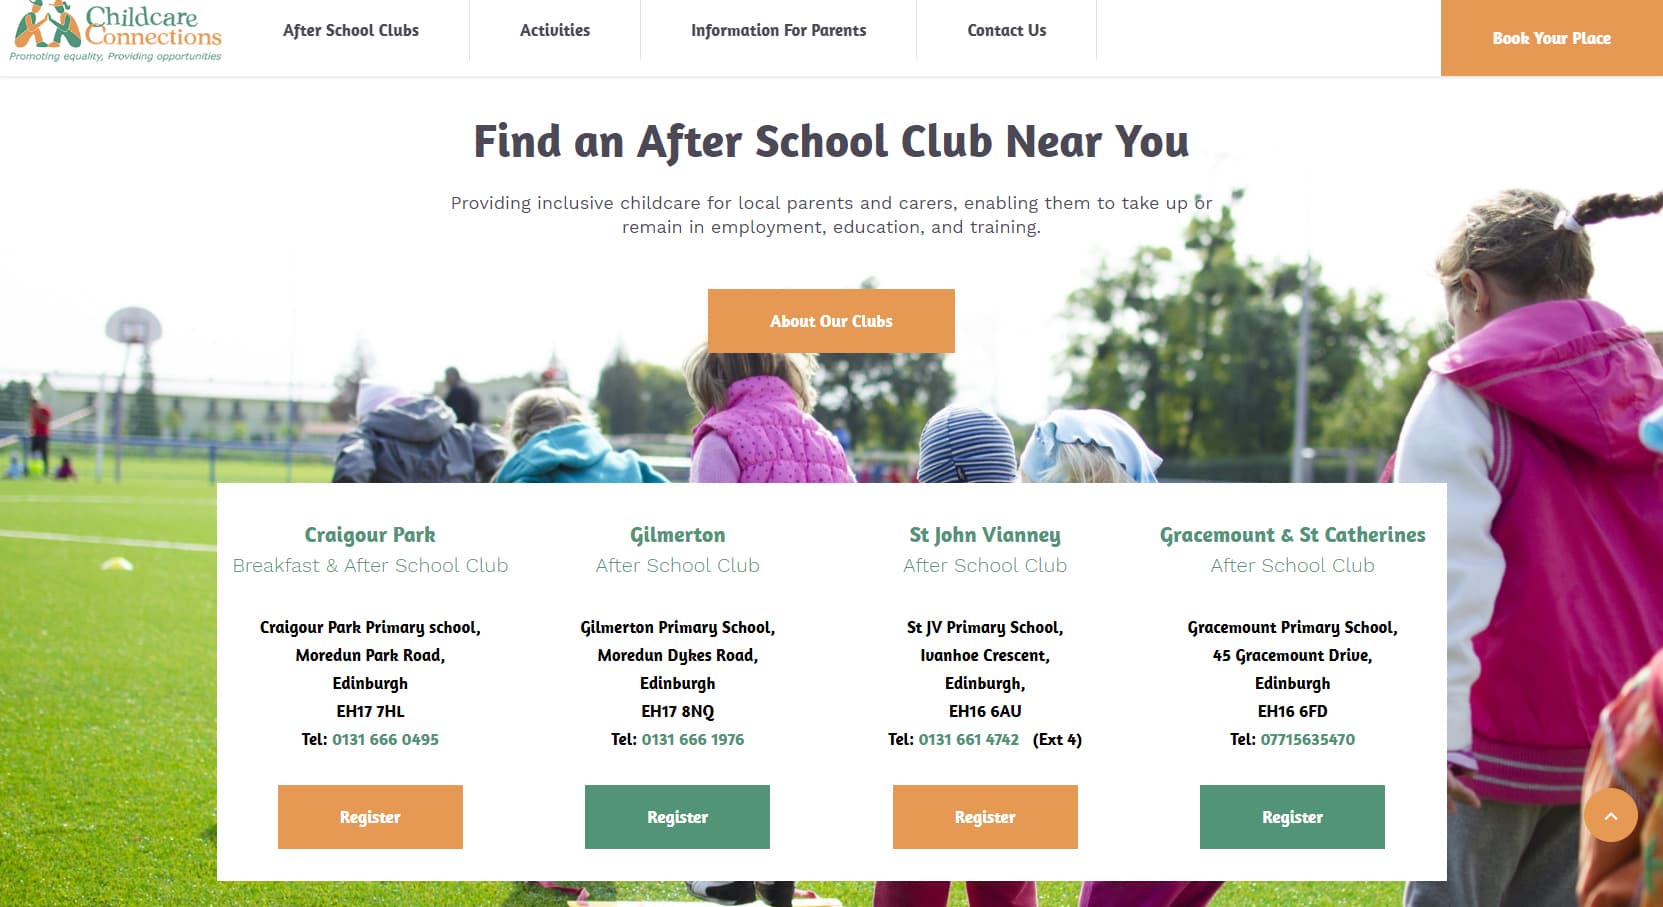 Childcare Connections website design